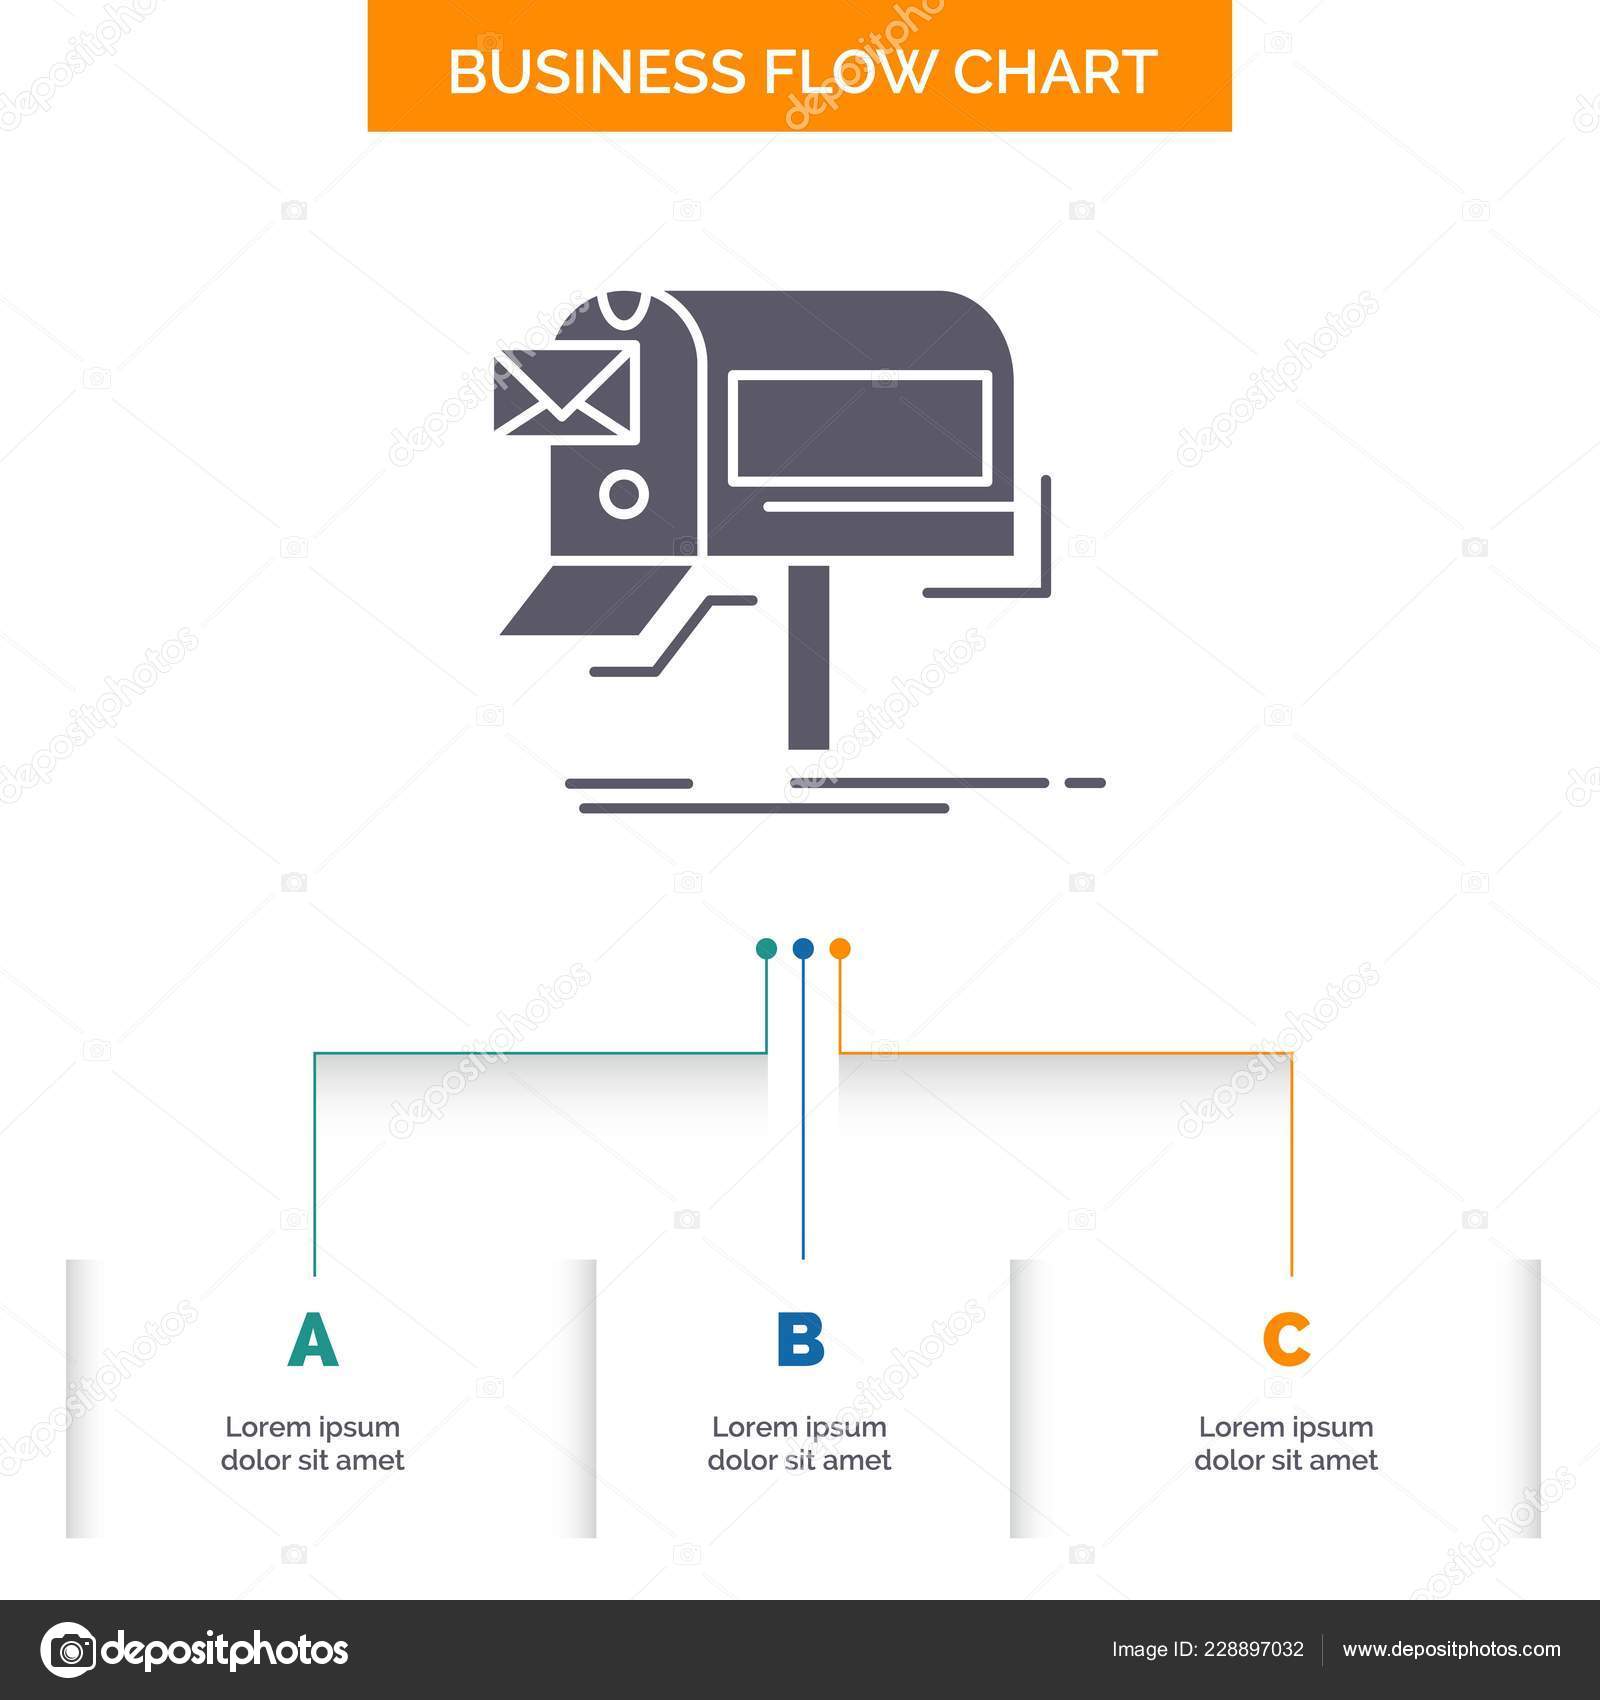 What Is Business Flow Chart